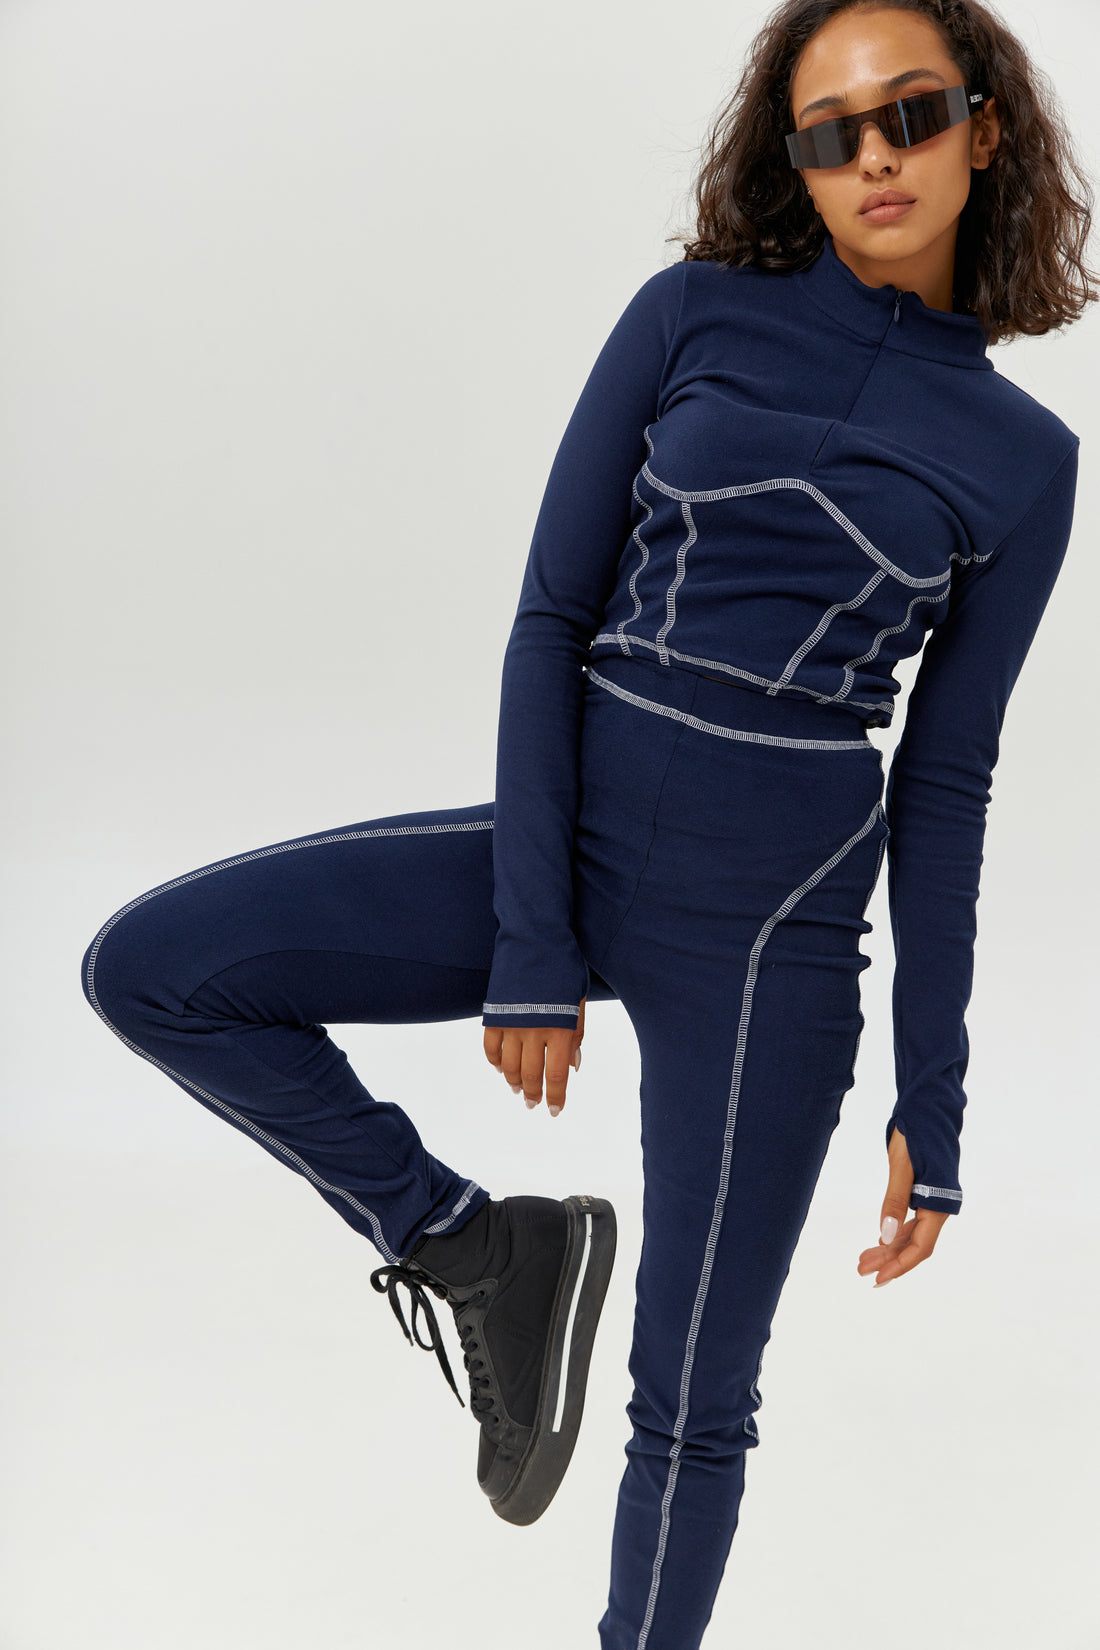 The Best Winter Thermals for Women